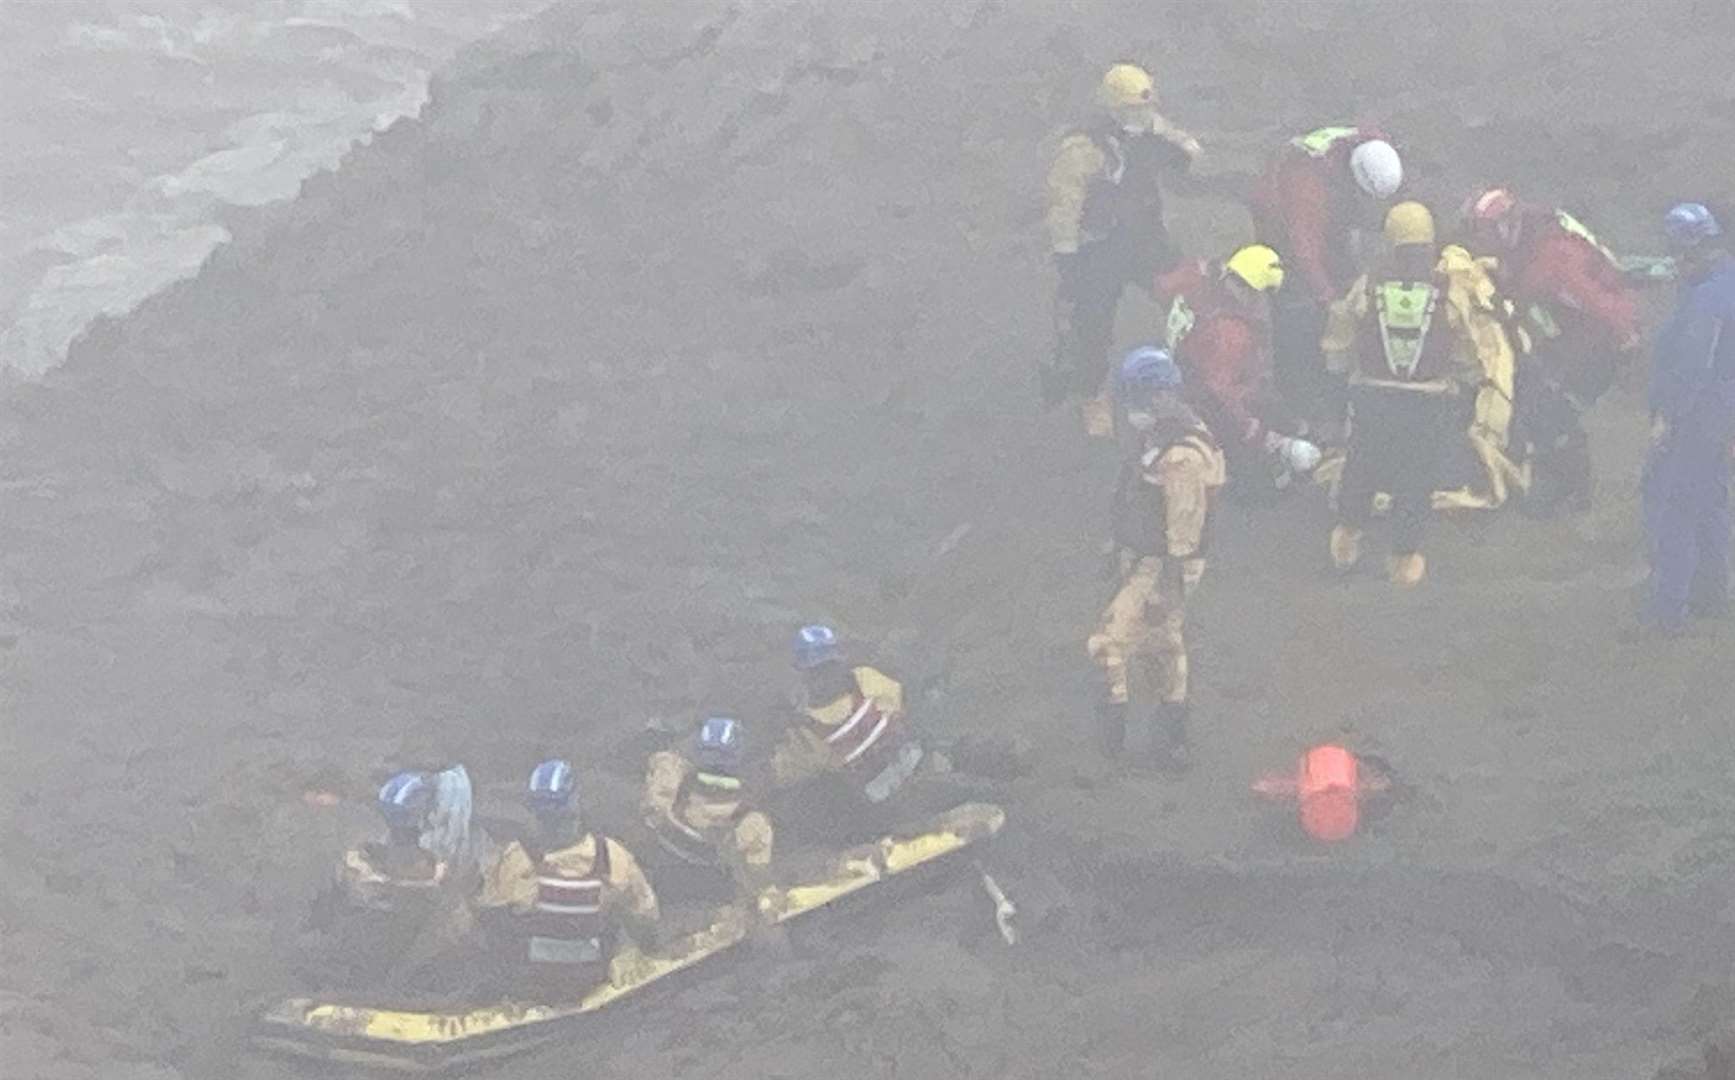 Two people were rescued from the mud. Picture: Dr Paula Owens